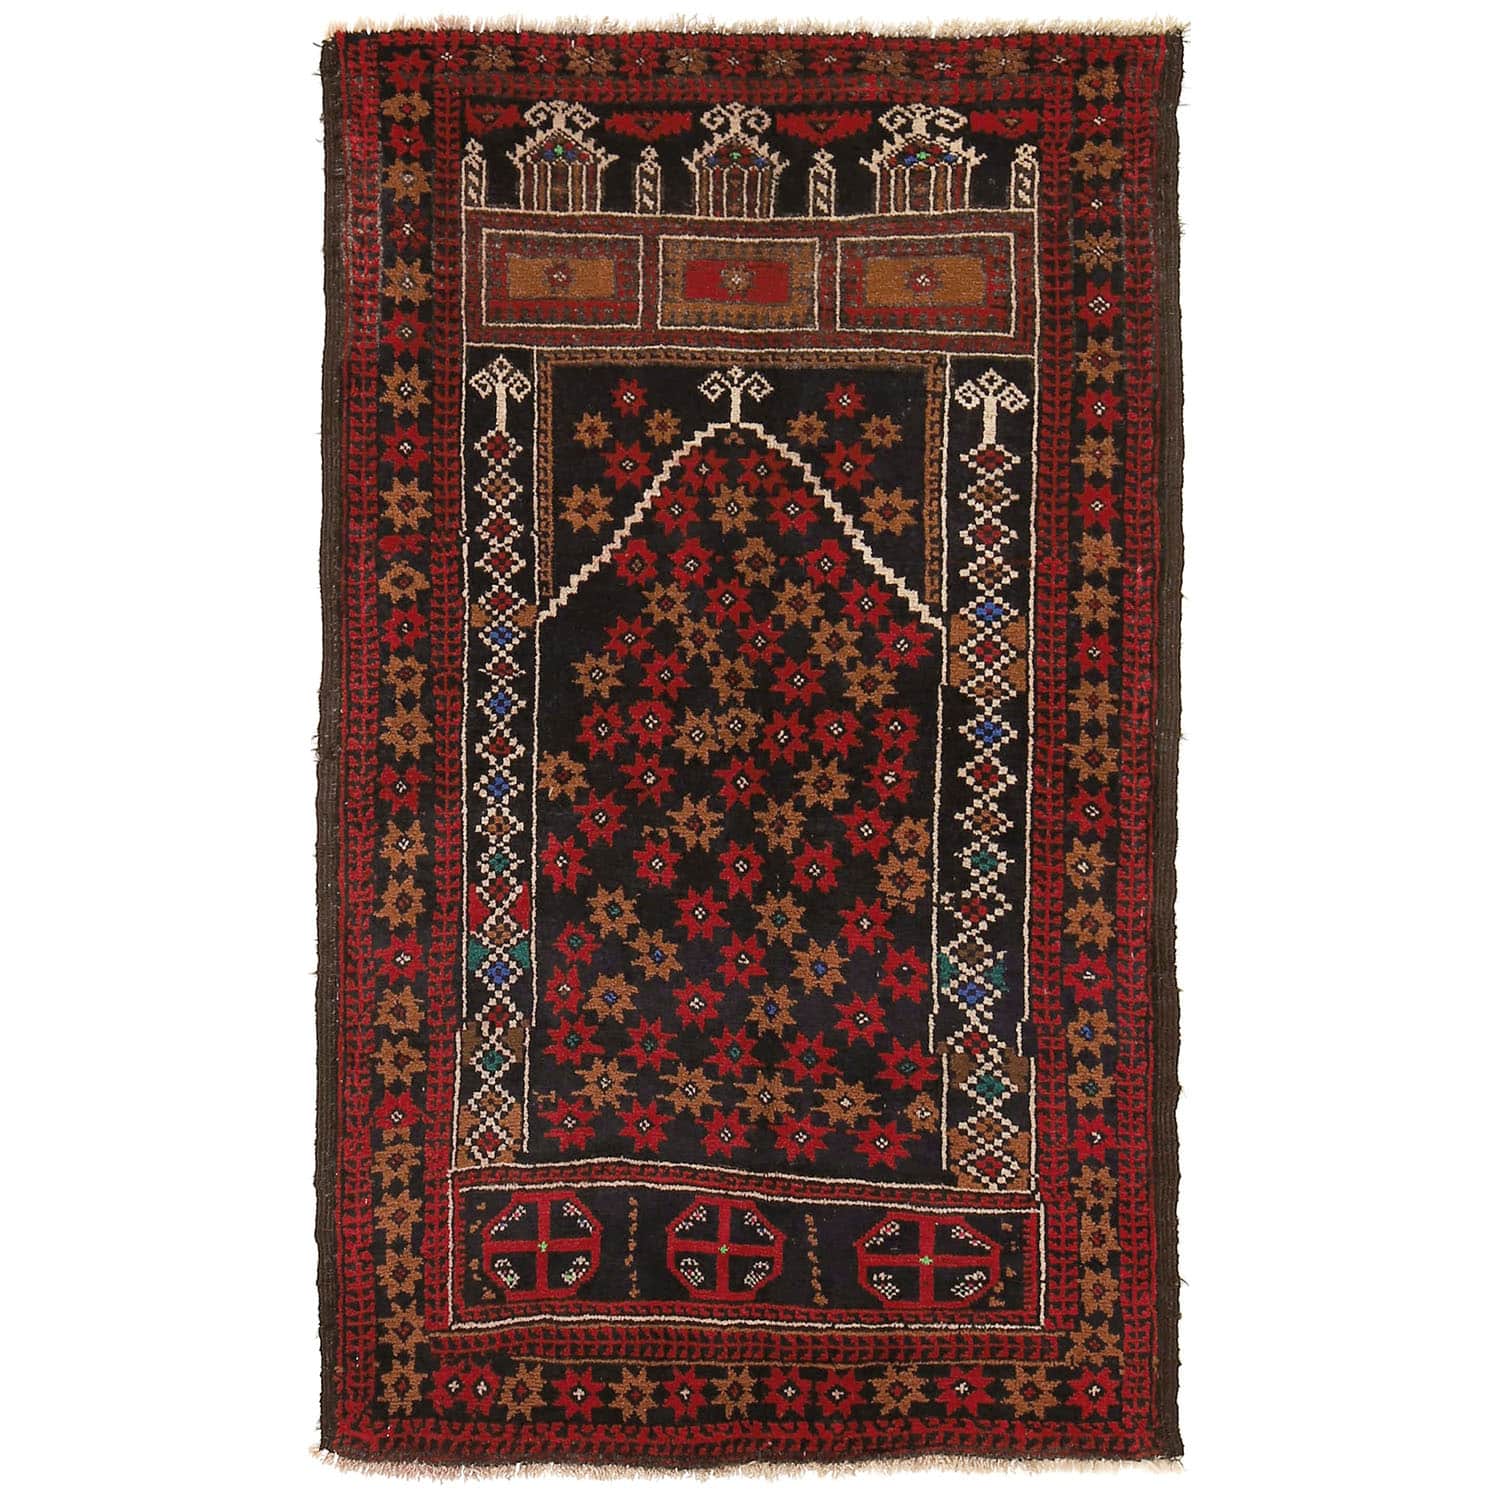 clean a persian rug by hand